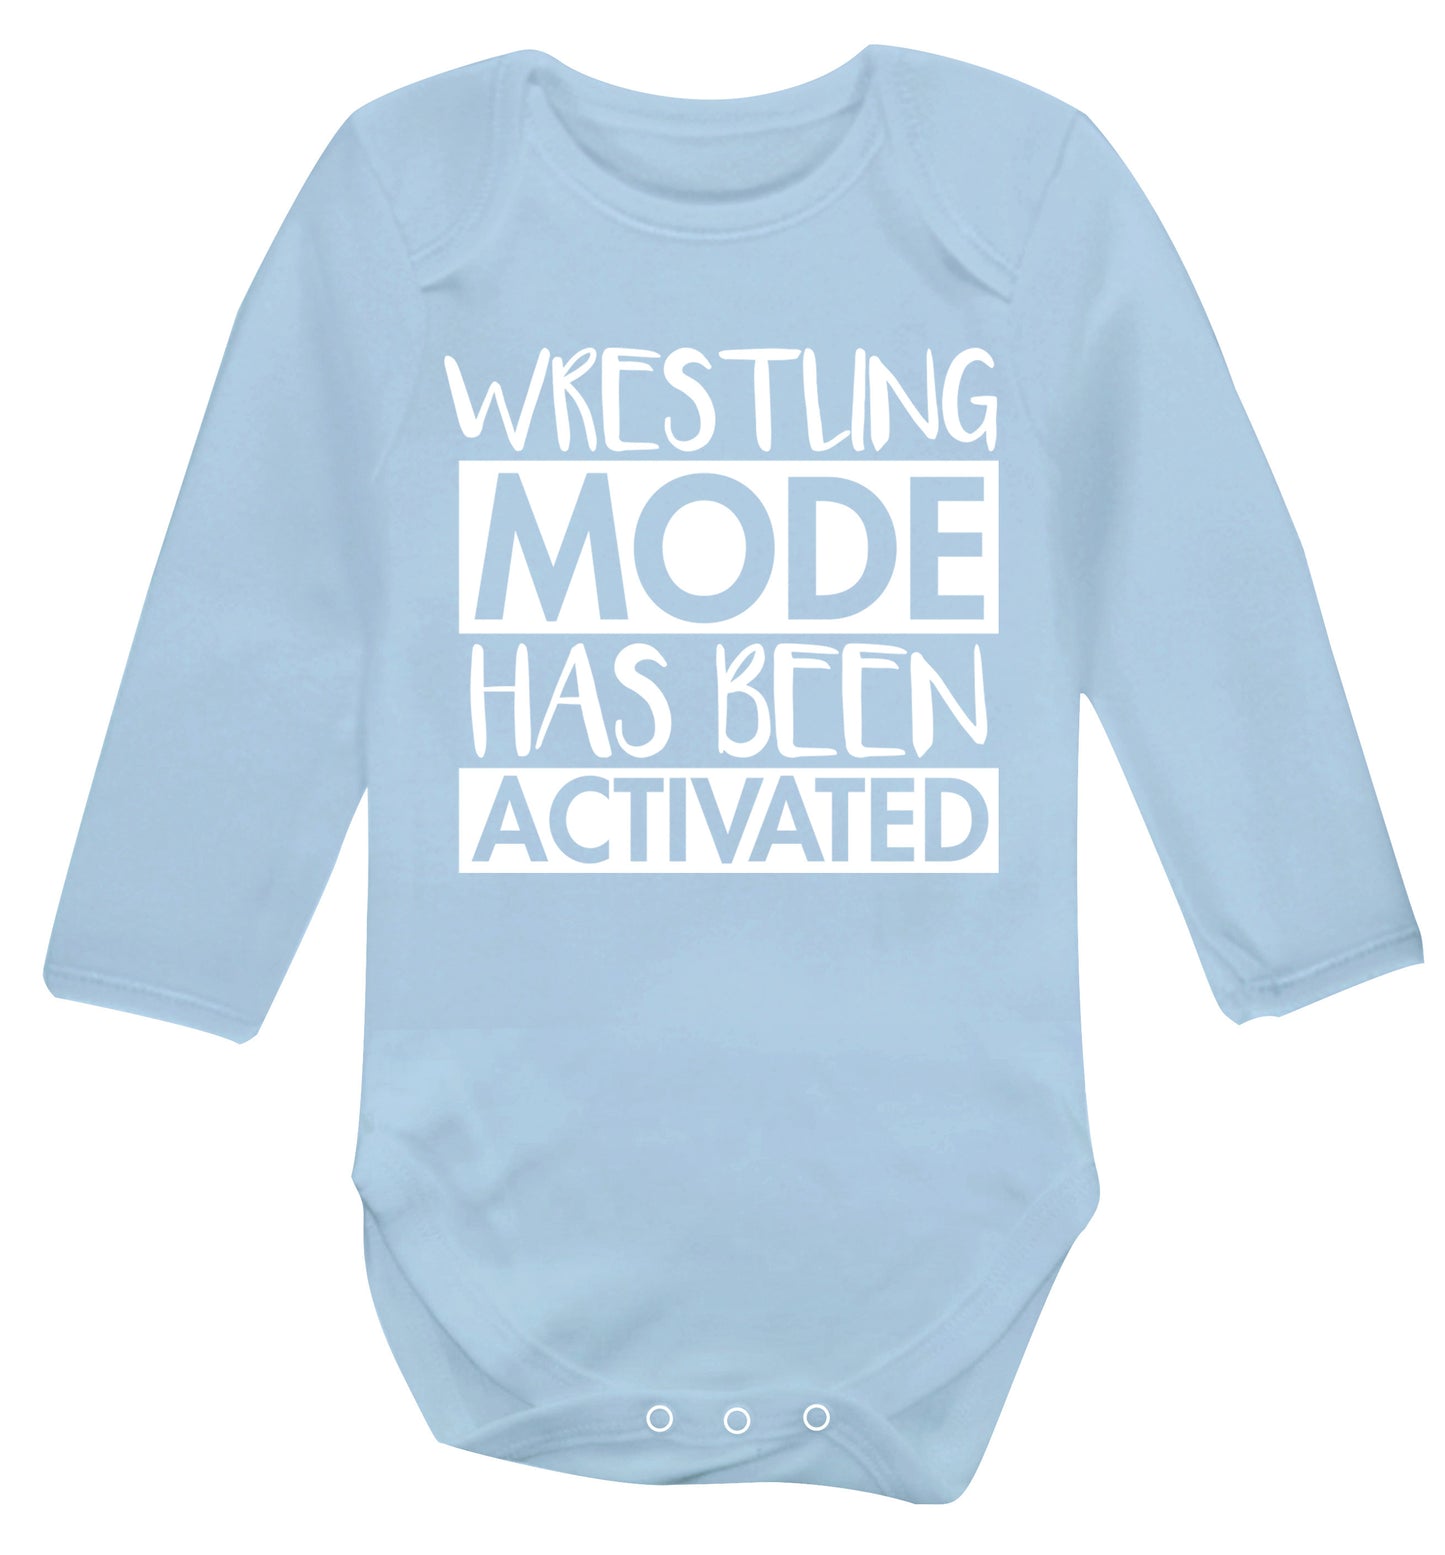 Wresting mode activated Baby Vest long sleeved pale blue 6-12 months